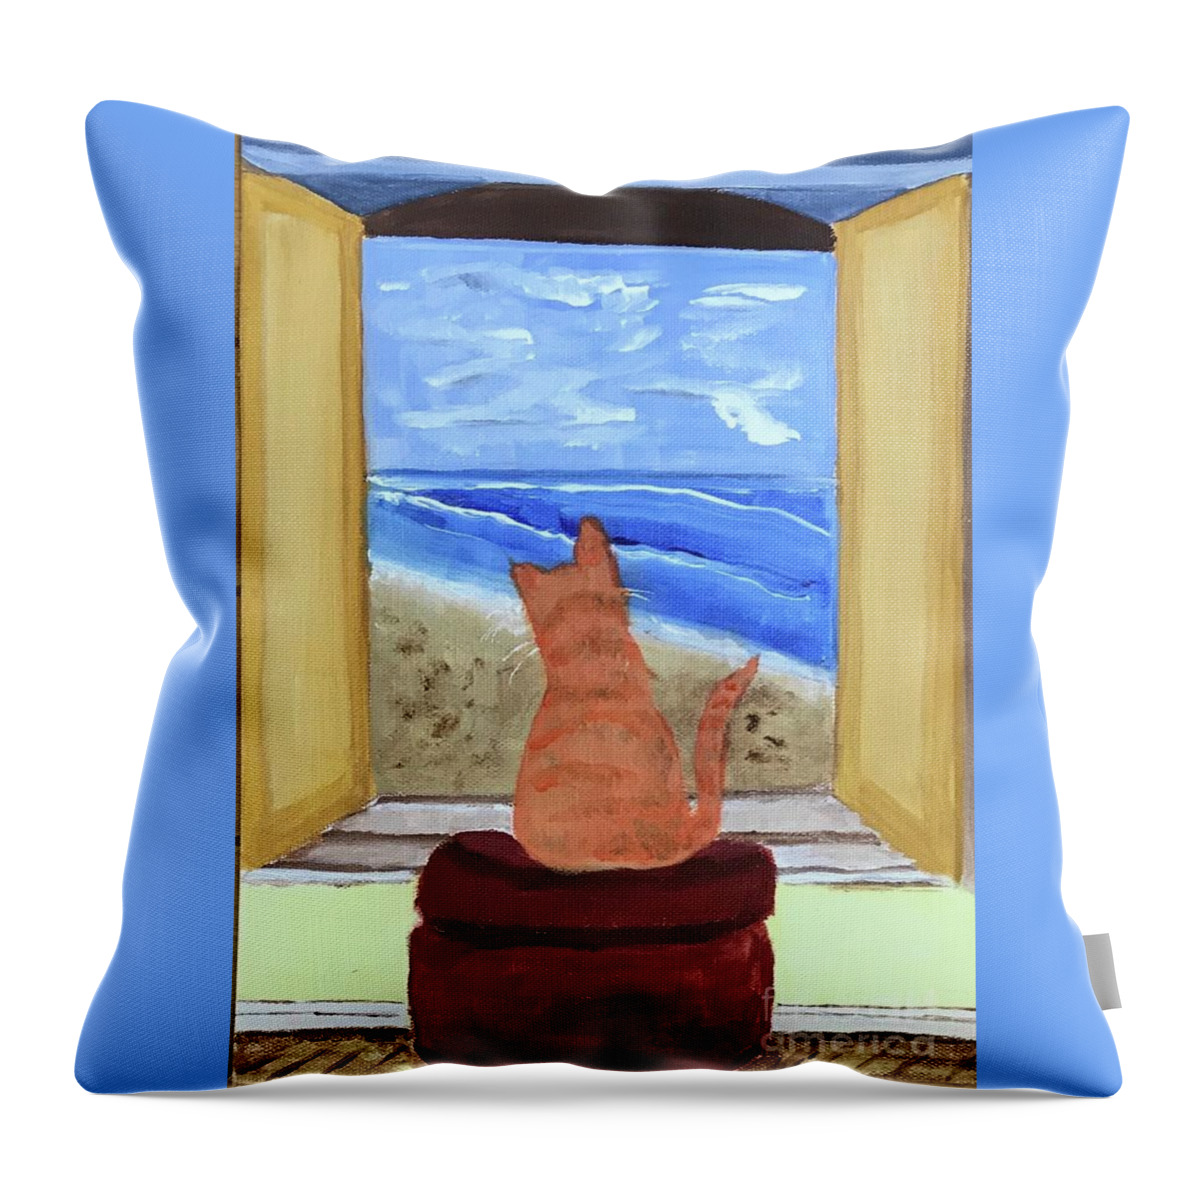 Original Art Work Throw Pillow featuring the painting Windows #2 by Theresa Honeycheck